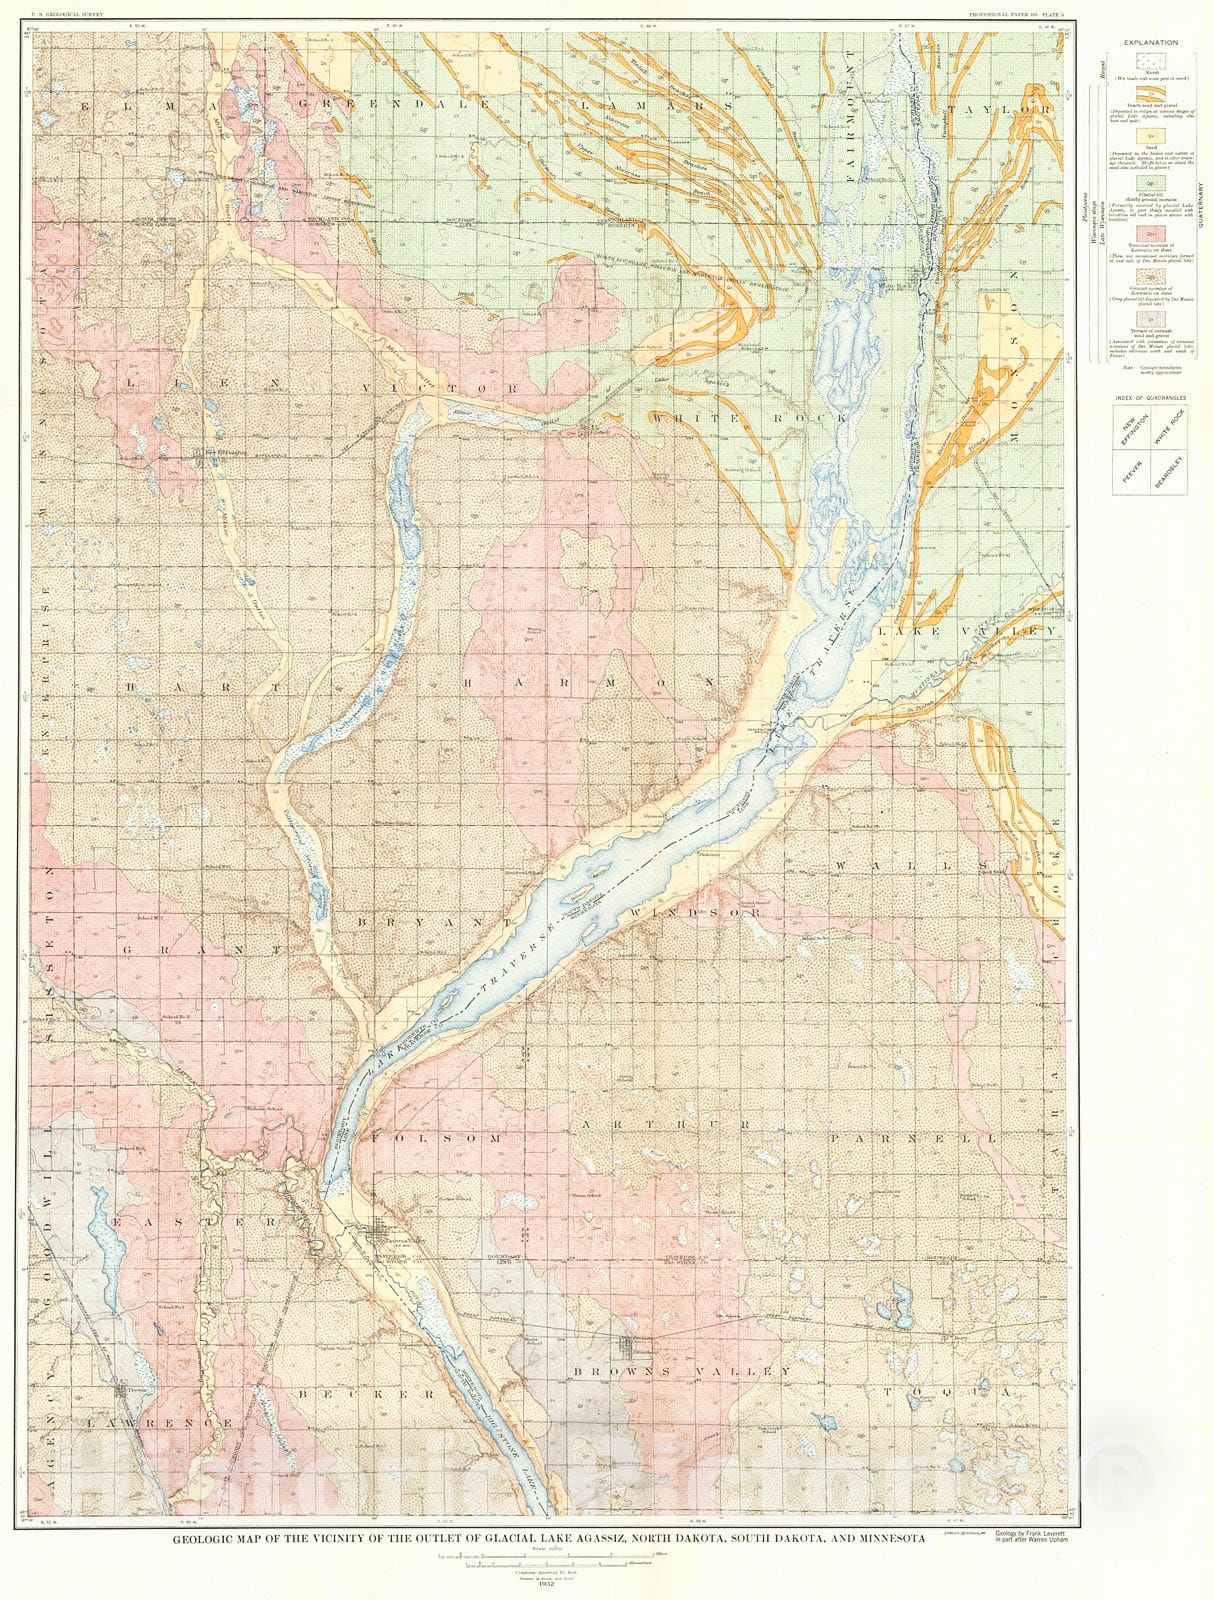 Historic Map : 1932 Geologic map of the vicinity of the outlet of Glacial Lake Agassiz, North Dakota, South Dakota and Minnesota  : Vintage Wall Art